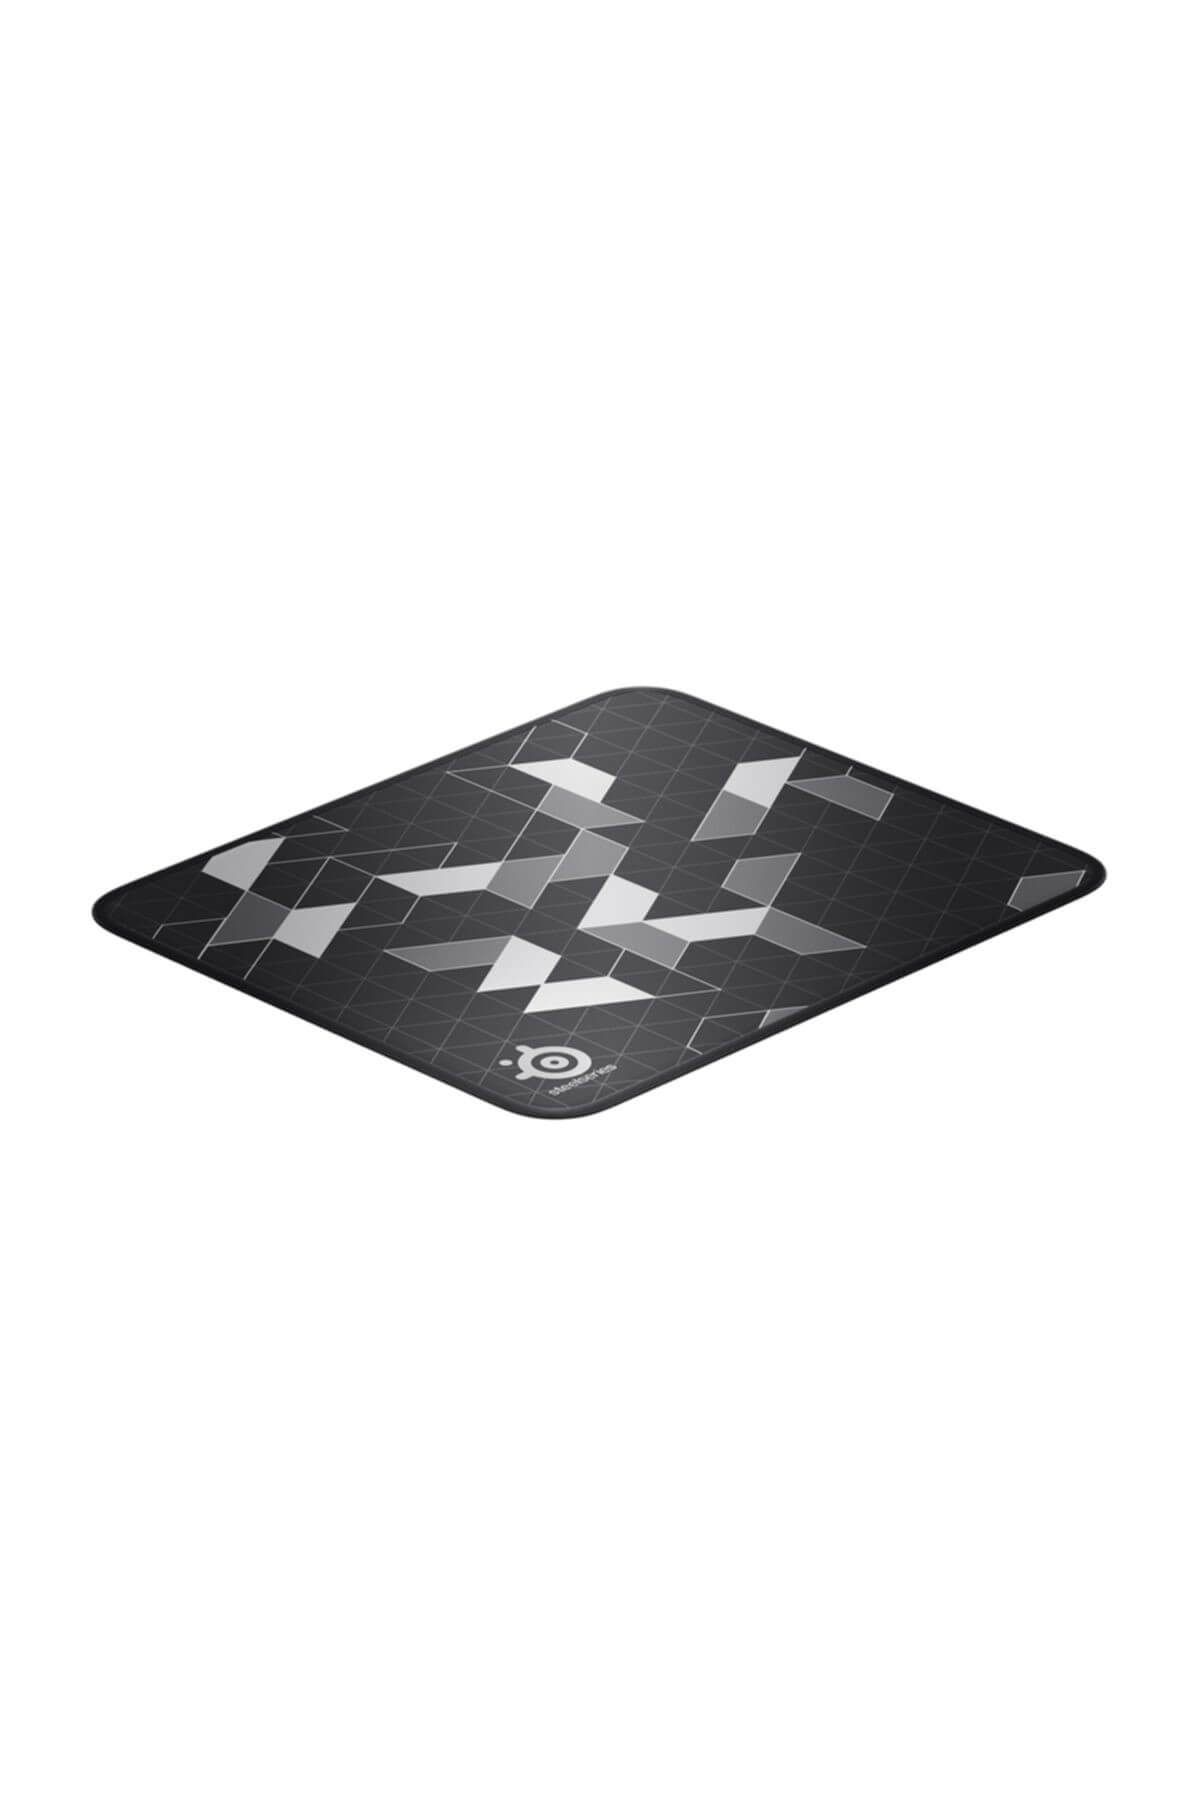 SteelSeries Qck+ Limited Large Mousepad